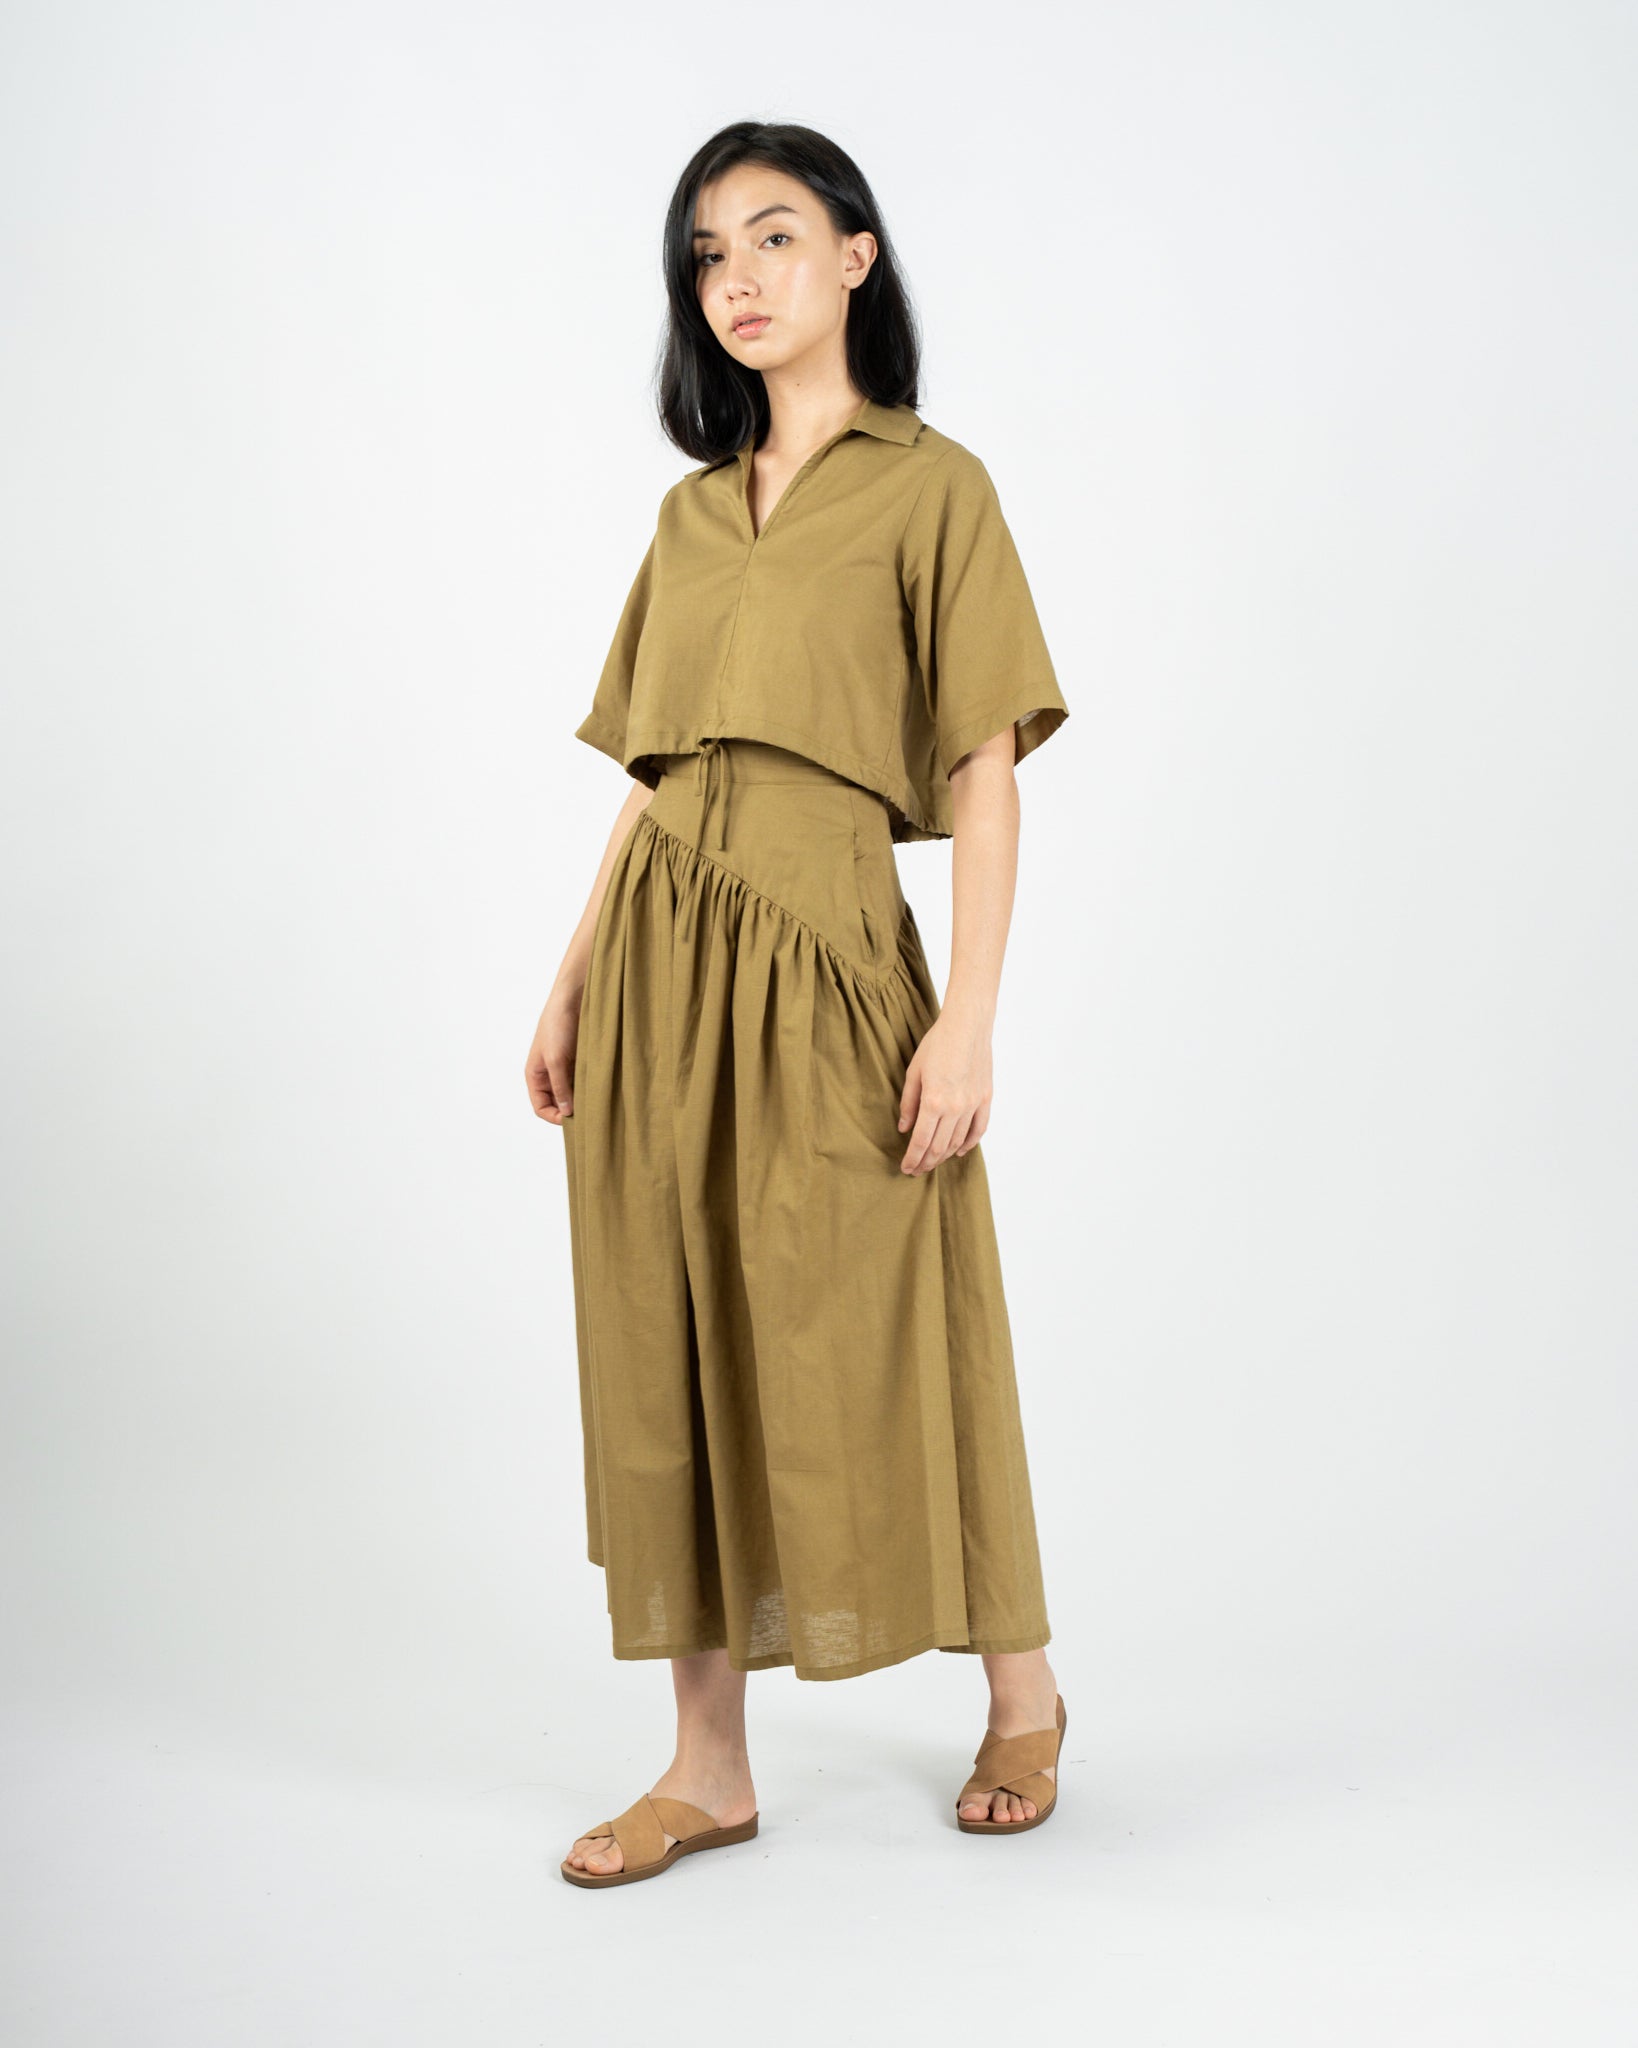 TWO-WAY BOXY COLLAR TOP in olive